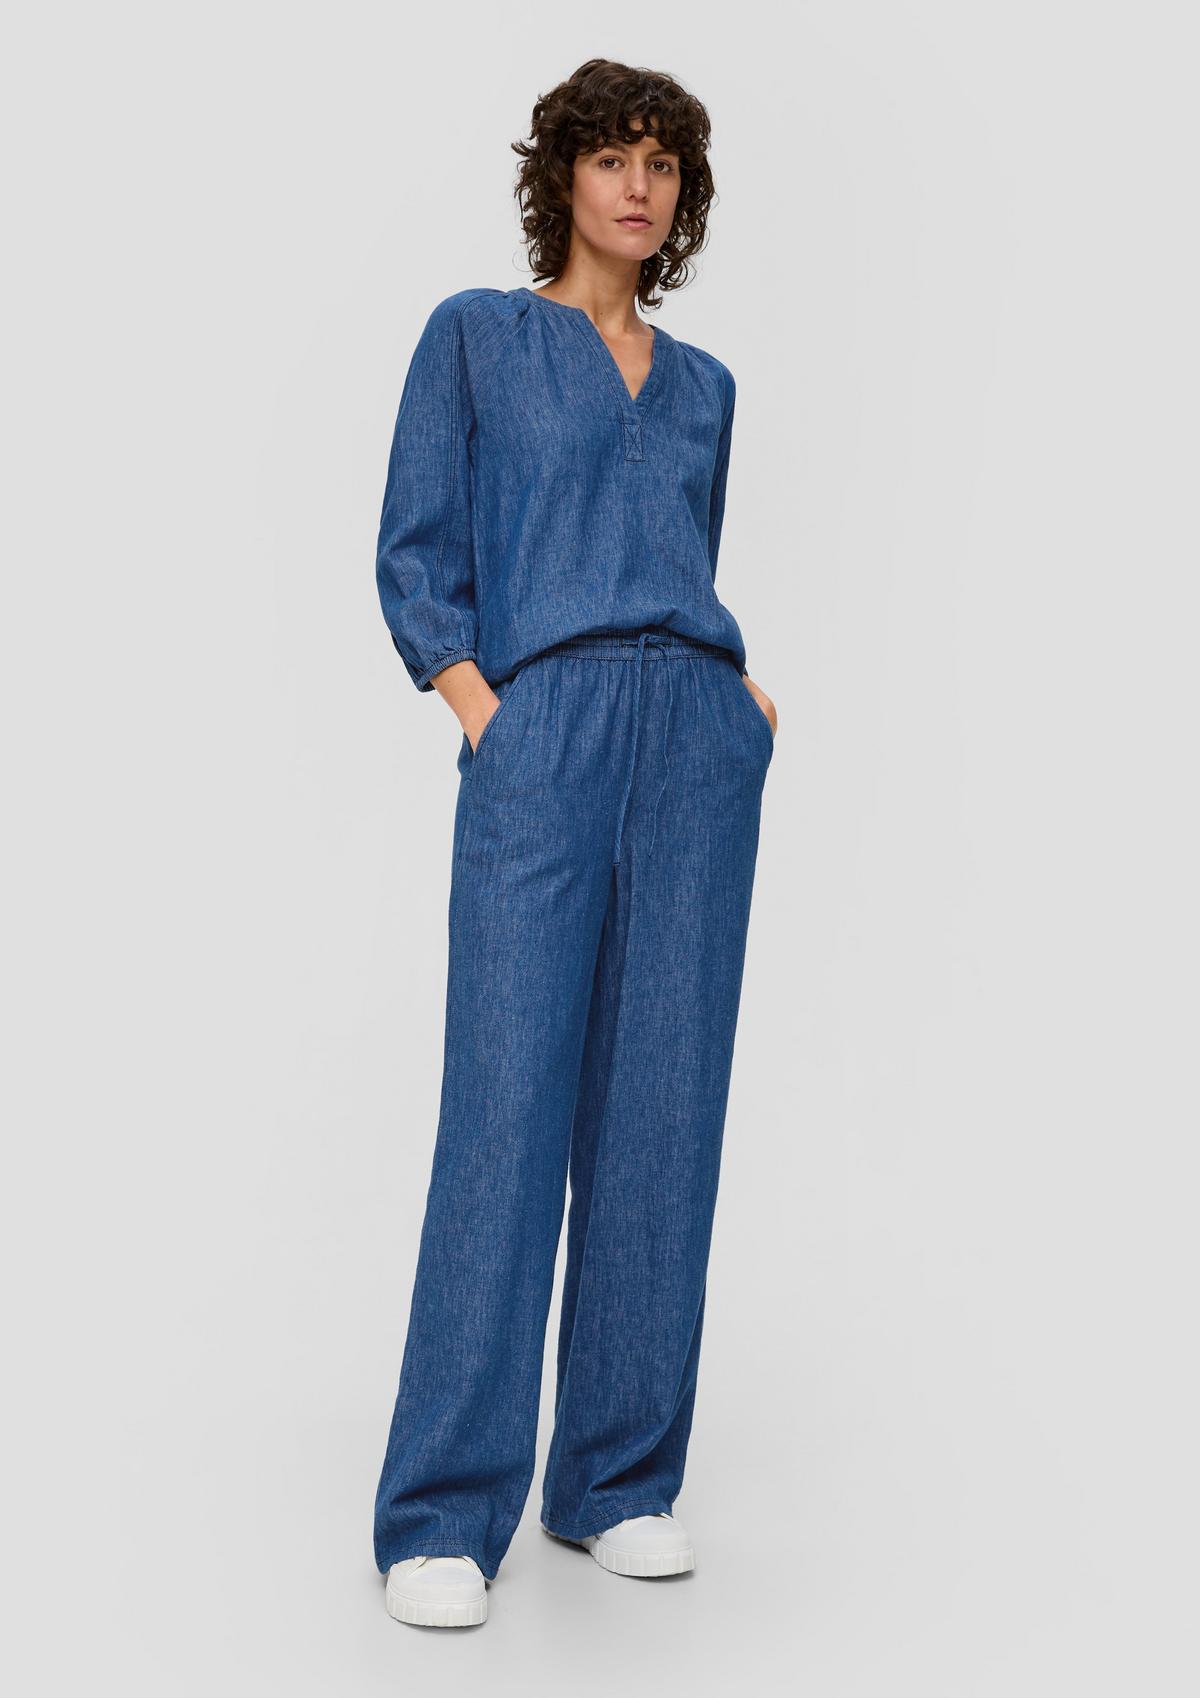 Relaxed : jupe-culotte Wide leg